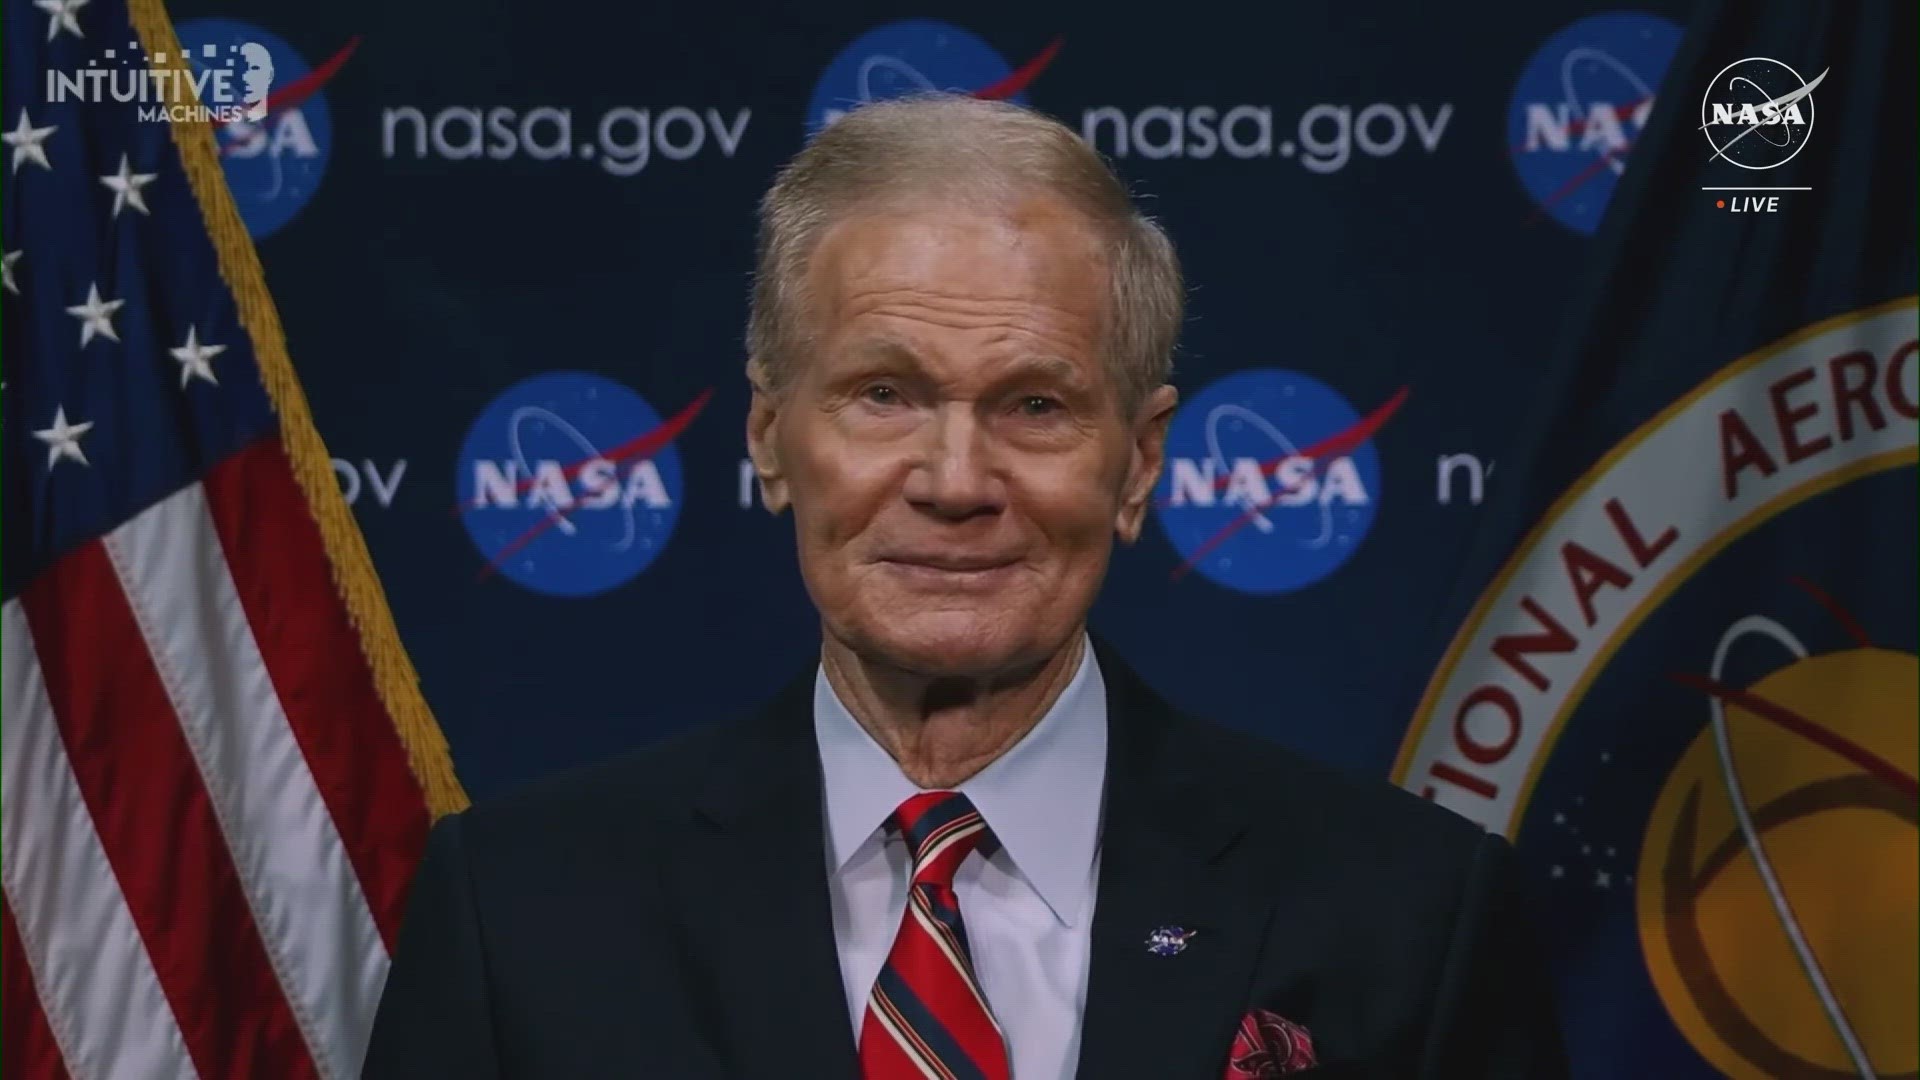 Bill Nelson was sworn in as the 14th NASA administrator in 2021, according to NASA. He also previously served as a United States Senator from Florida.